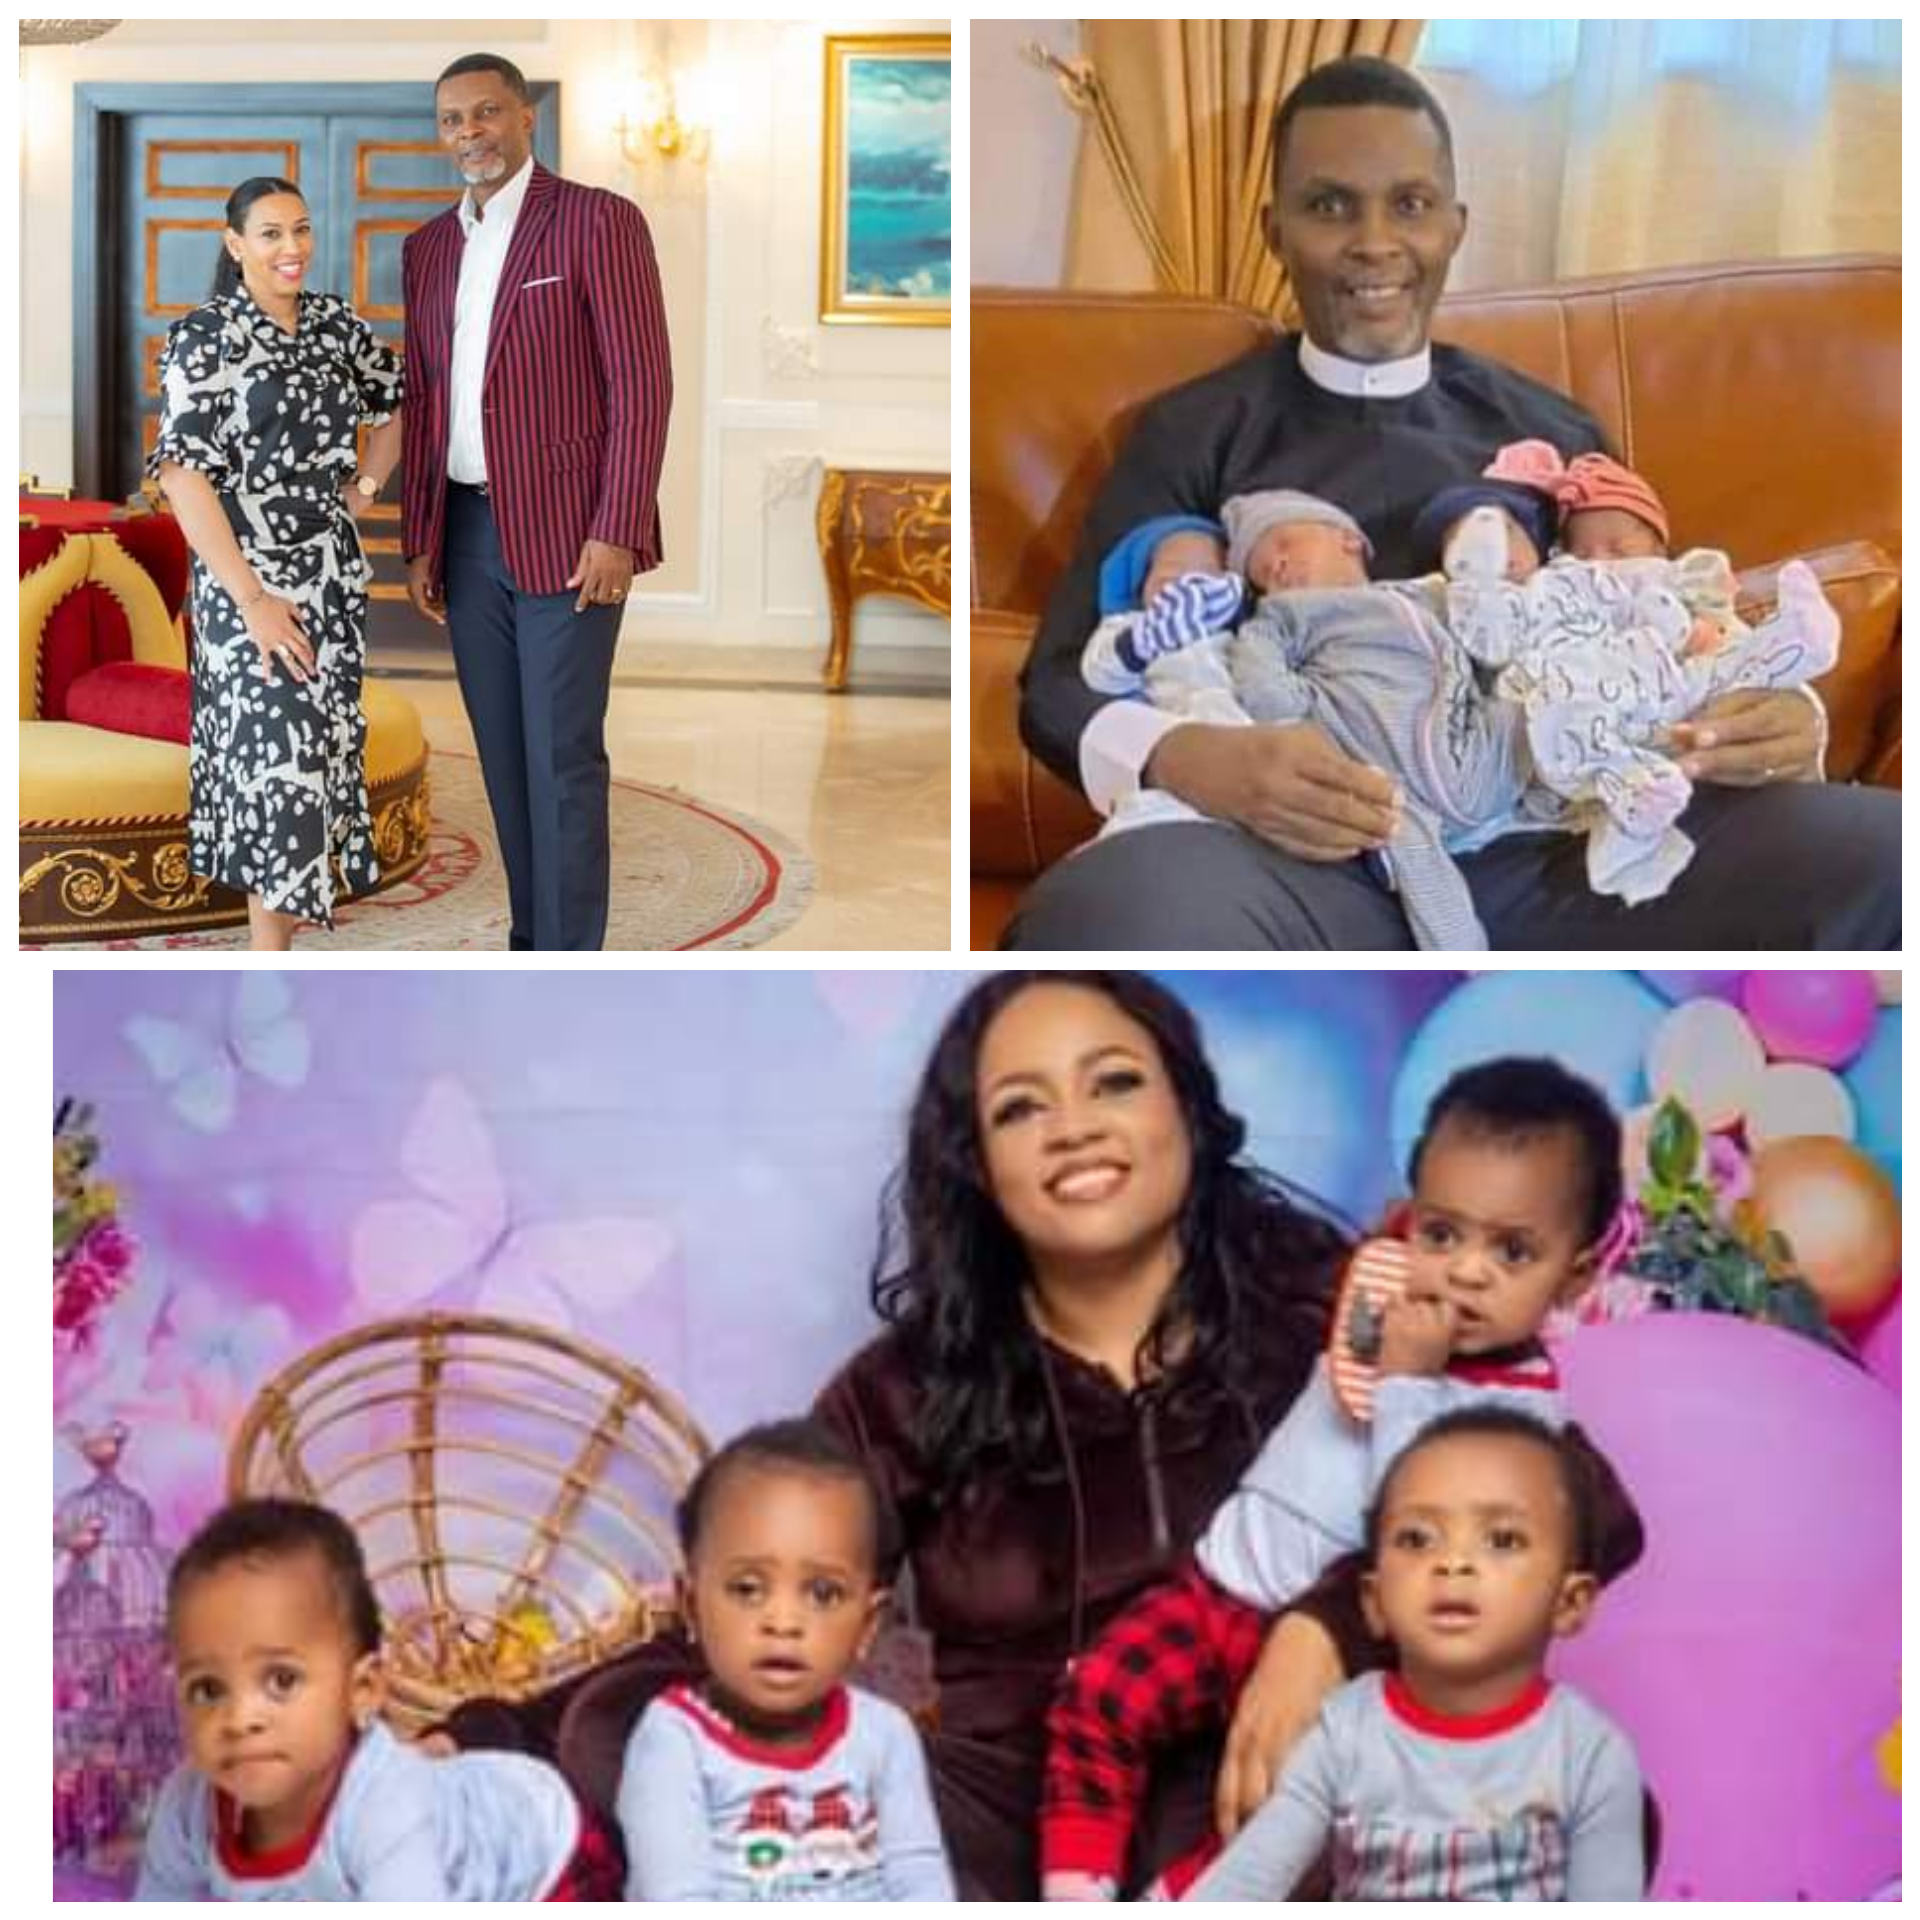 PASTOR WELCOMED QUADRUPLETS AFTER 19 YEARS OF WAITING